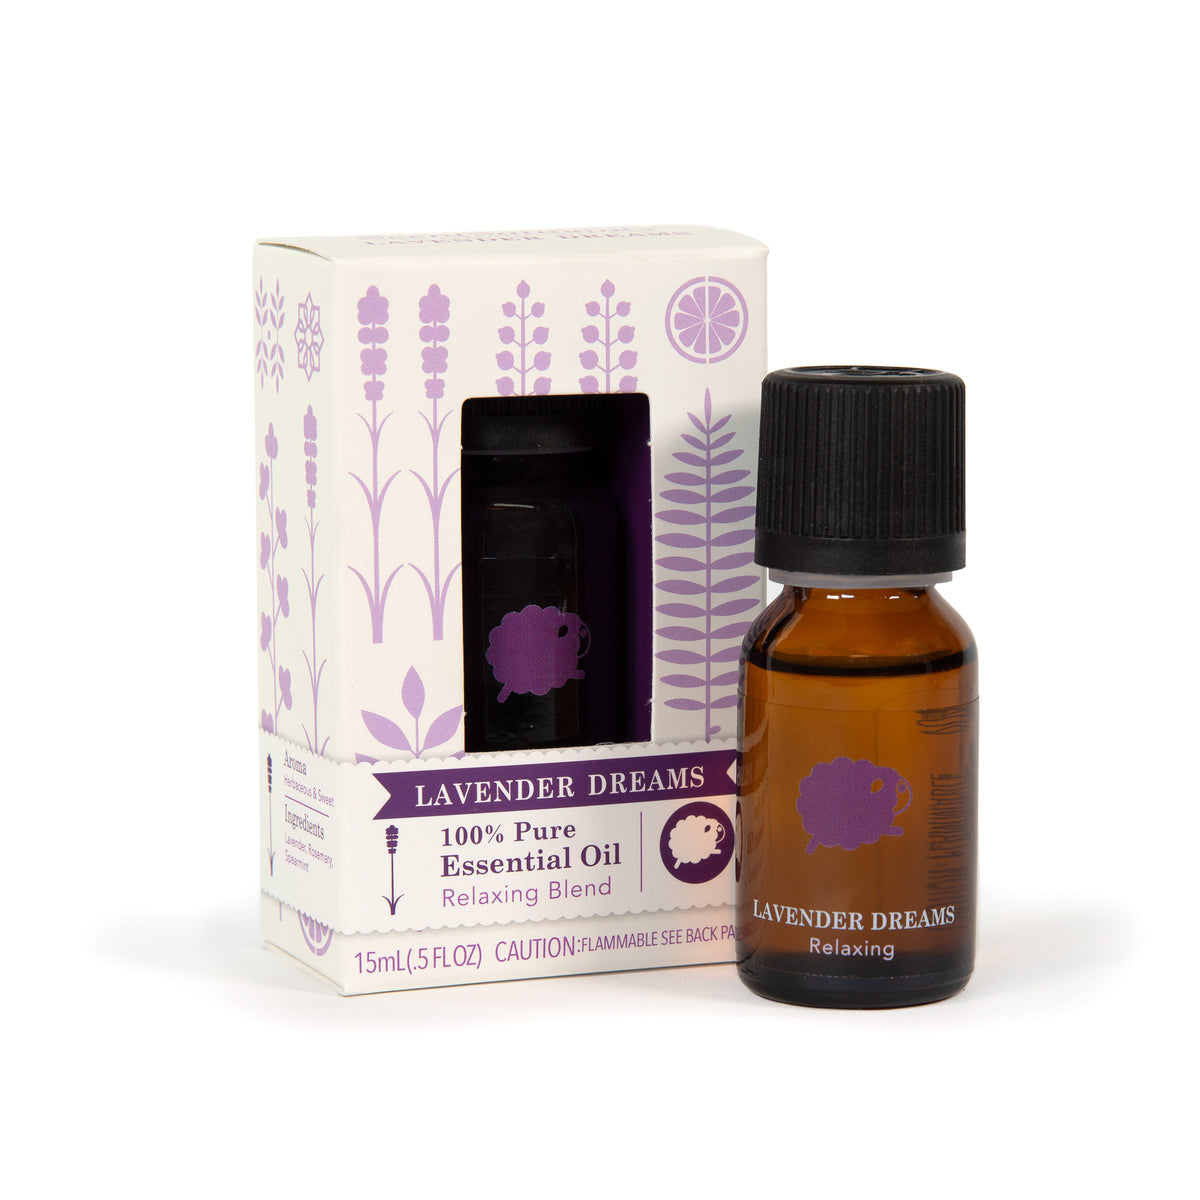 Shop Young Living's Essential Oil Products, Singles, Blends, and More